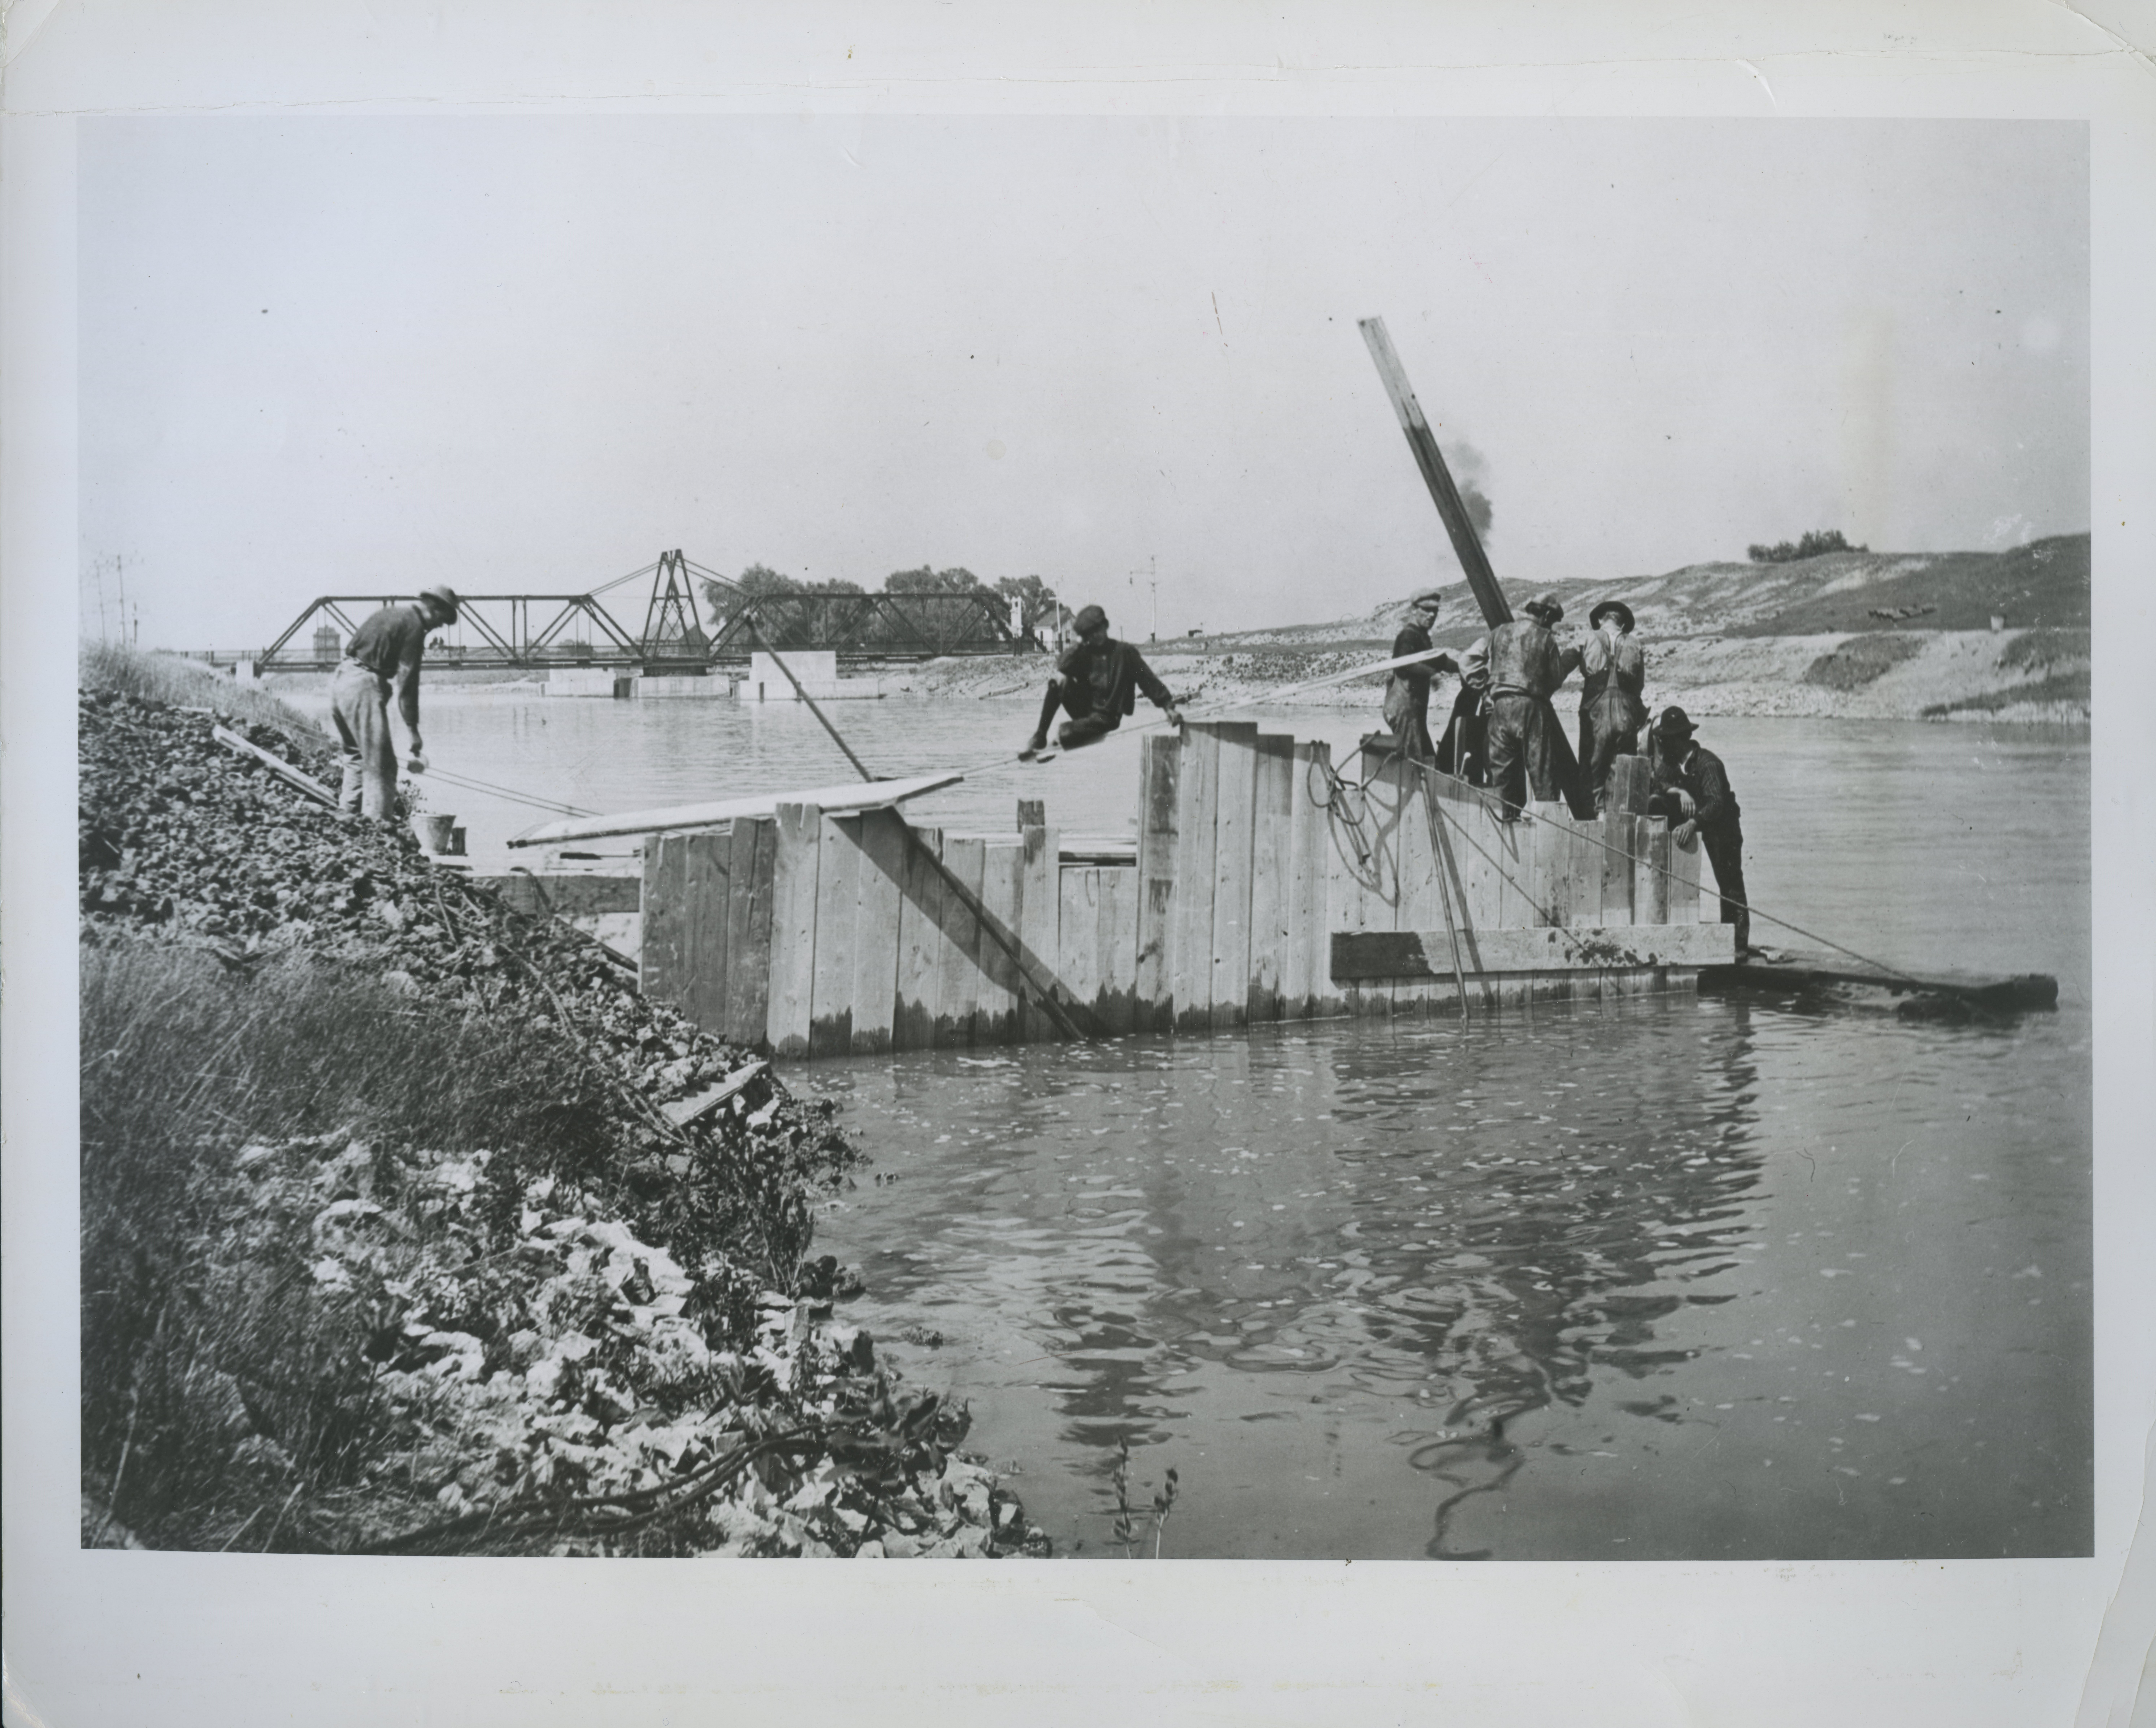 An old photograph of some workers standing on a structure in the water.